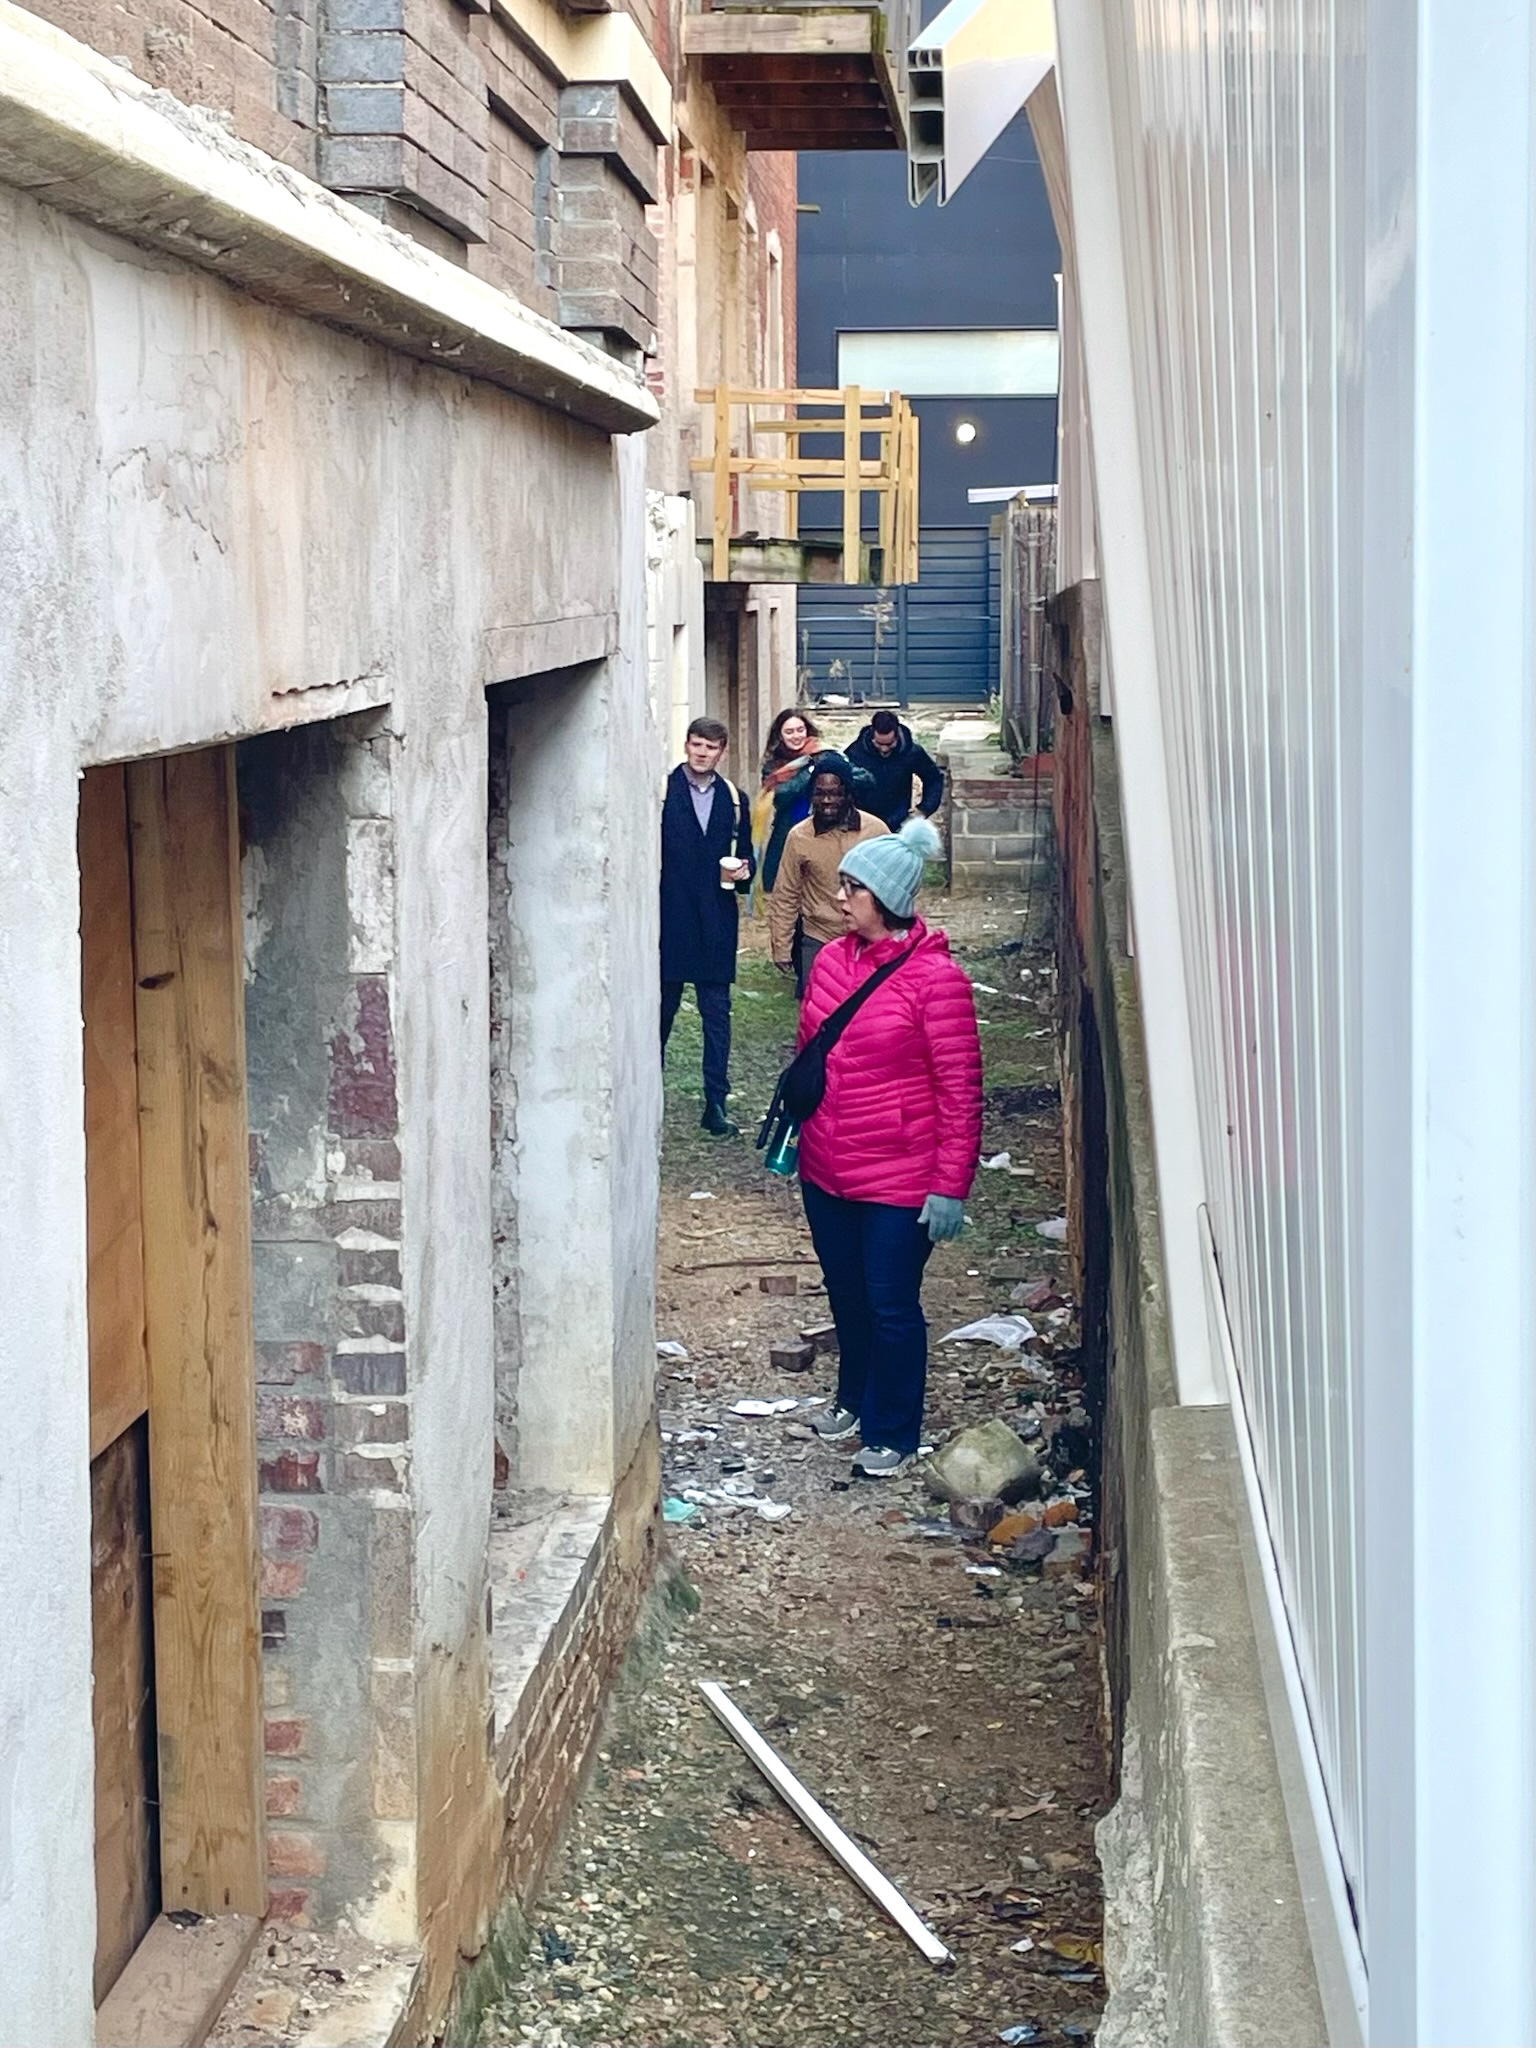 Councilmember Nadeau and others standing in a narrow space between two buildings, looks at the building and boarded up windows.